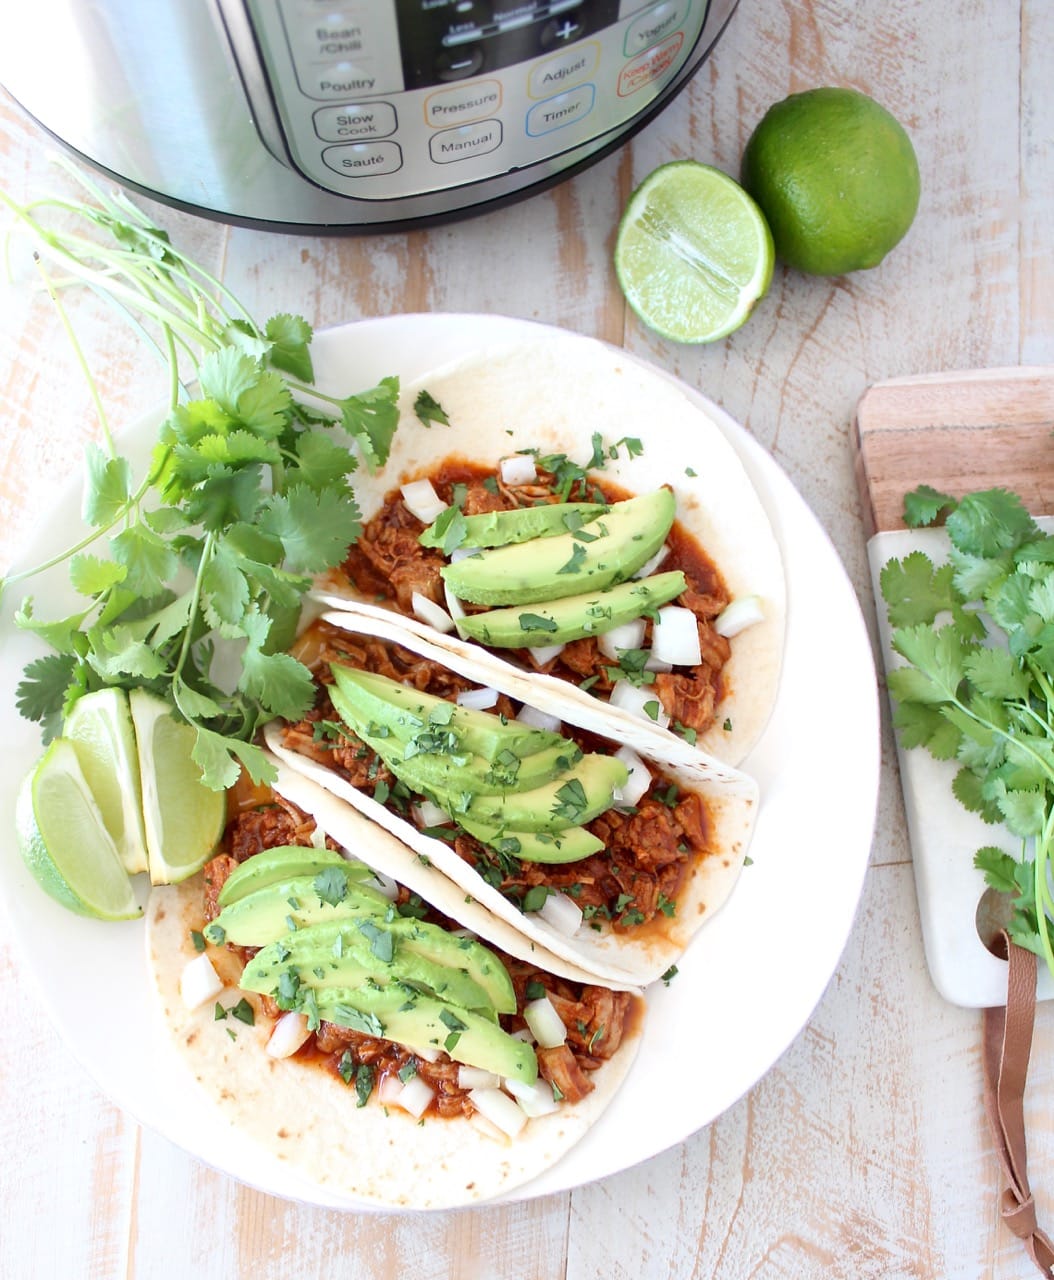 Instant pot pulled pork tacos are easy to make in under an hour with lean pork tenderloin, a delicious combination of spices and a sriracha honey tomato sauce!